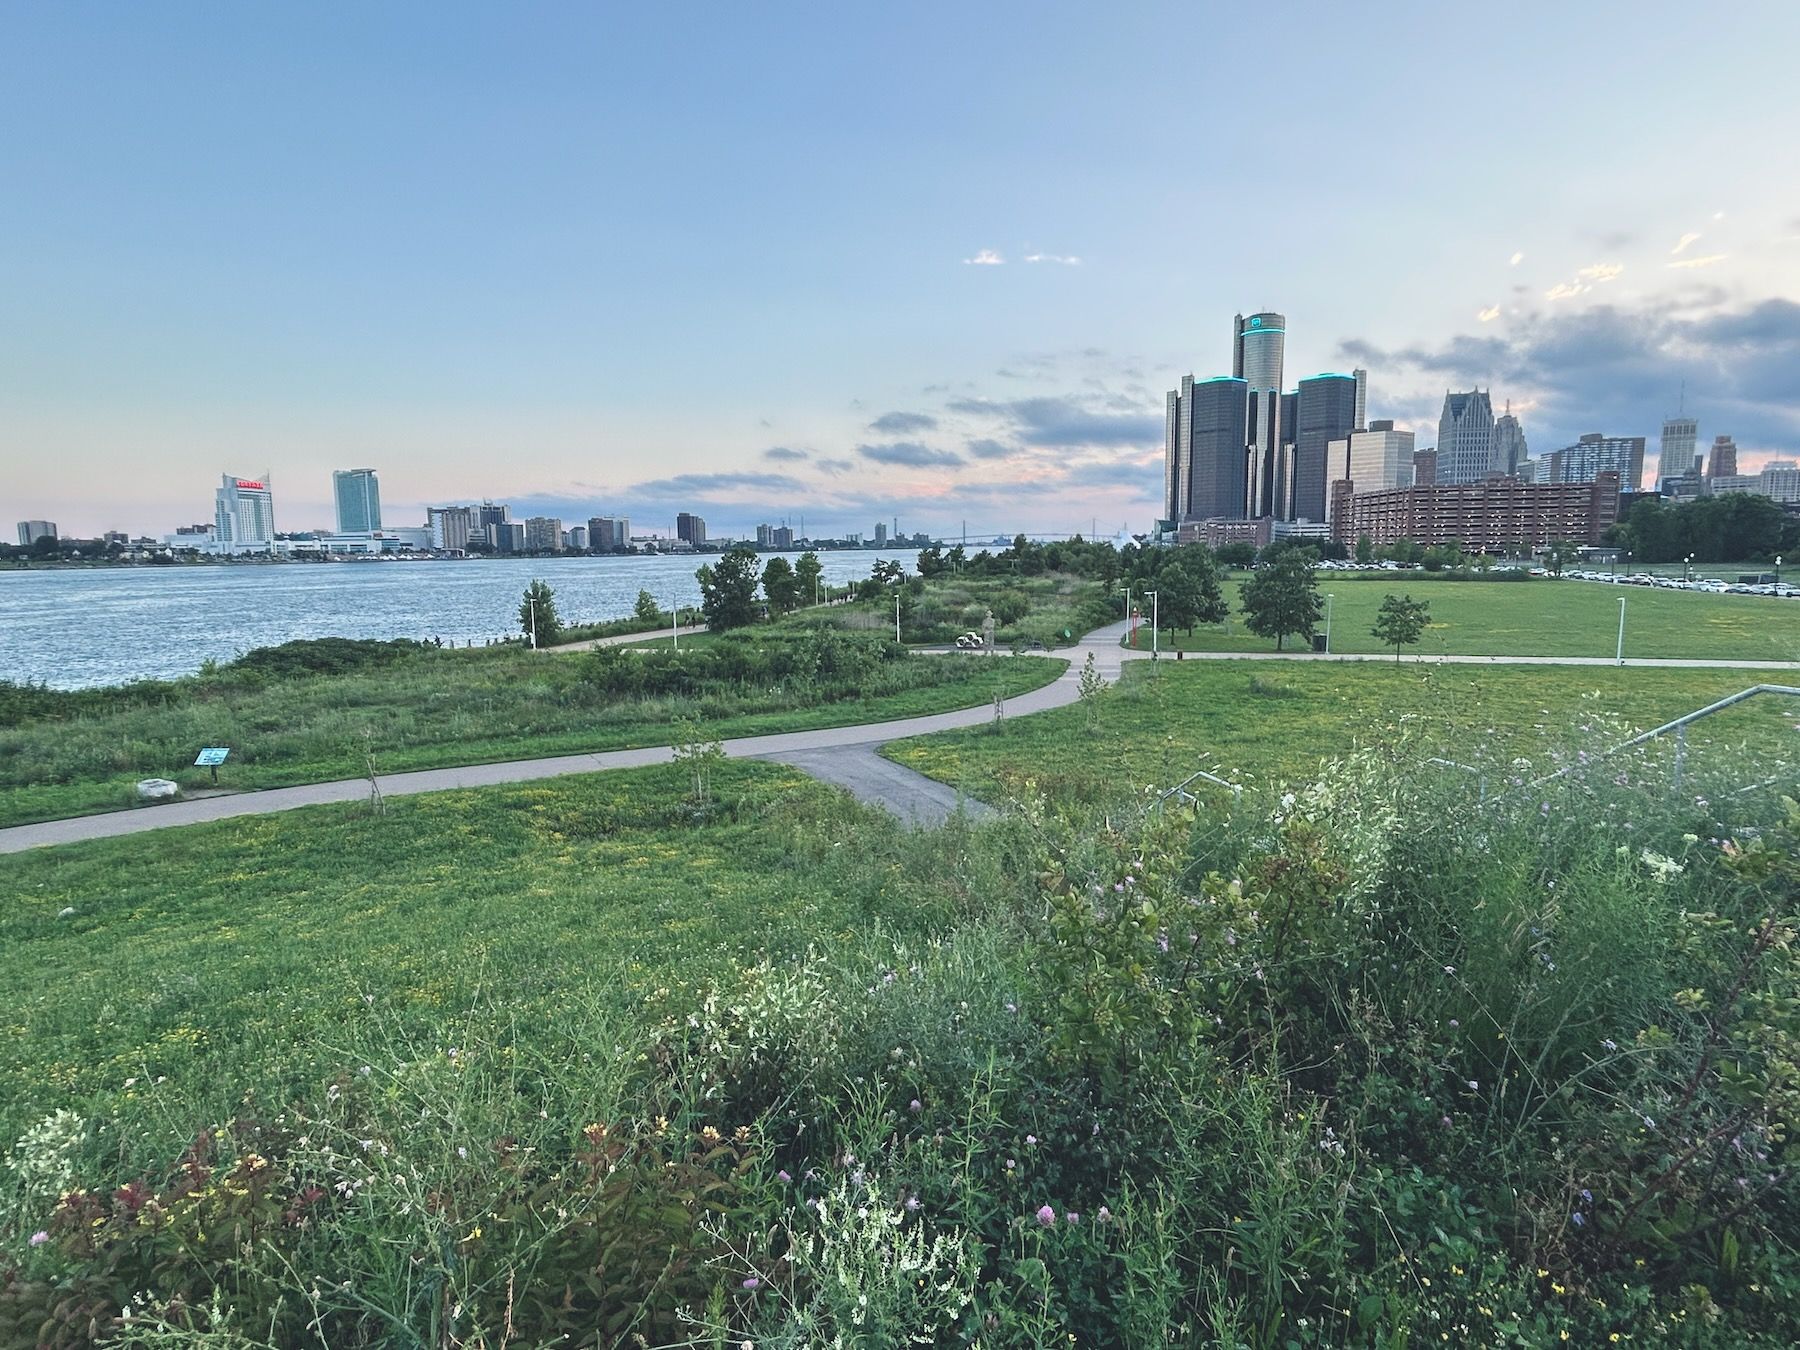 View from a hill near the Detroit river. Wetland plants, snaking concrete path, skyline and Windsor in the distance.